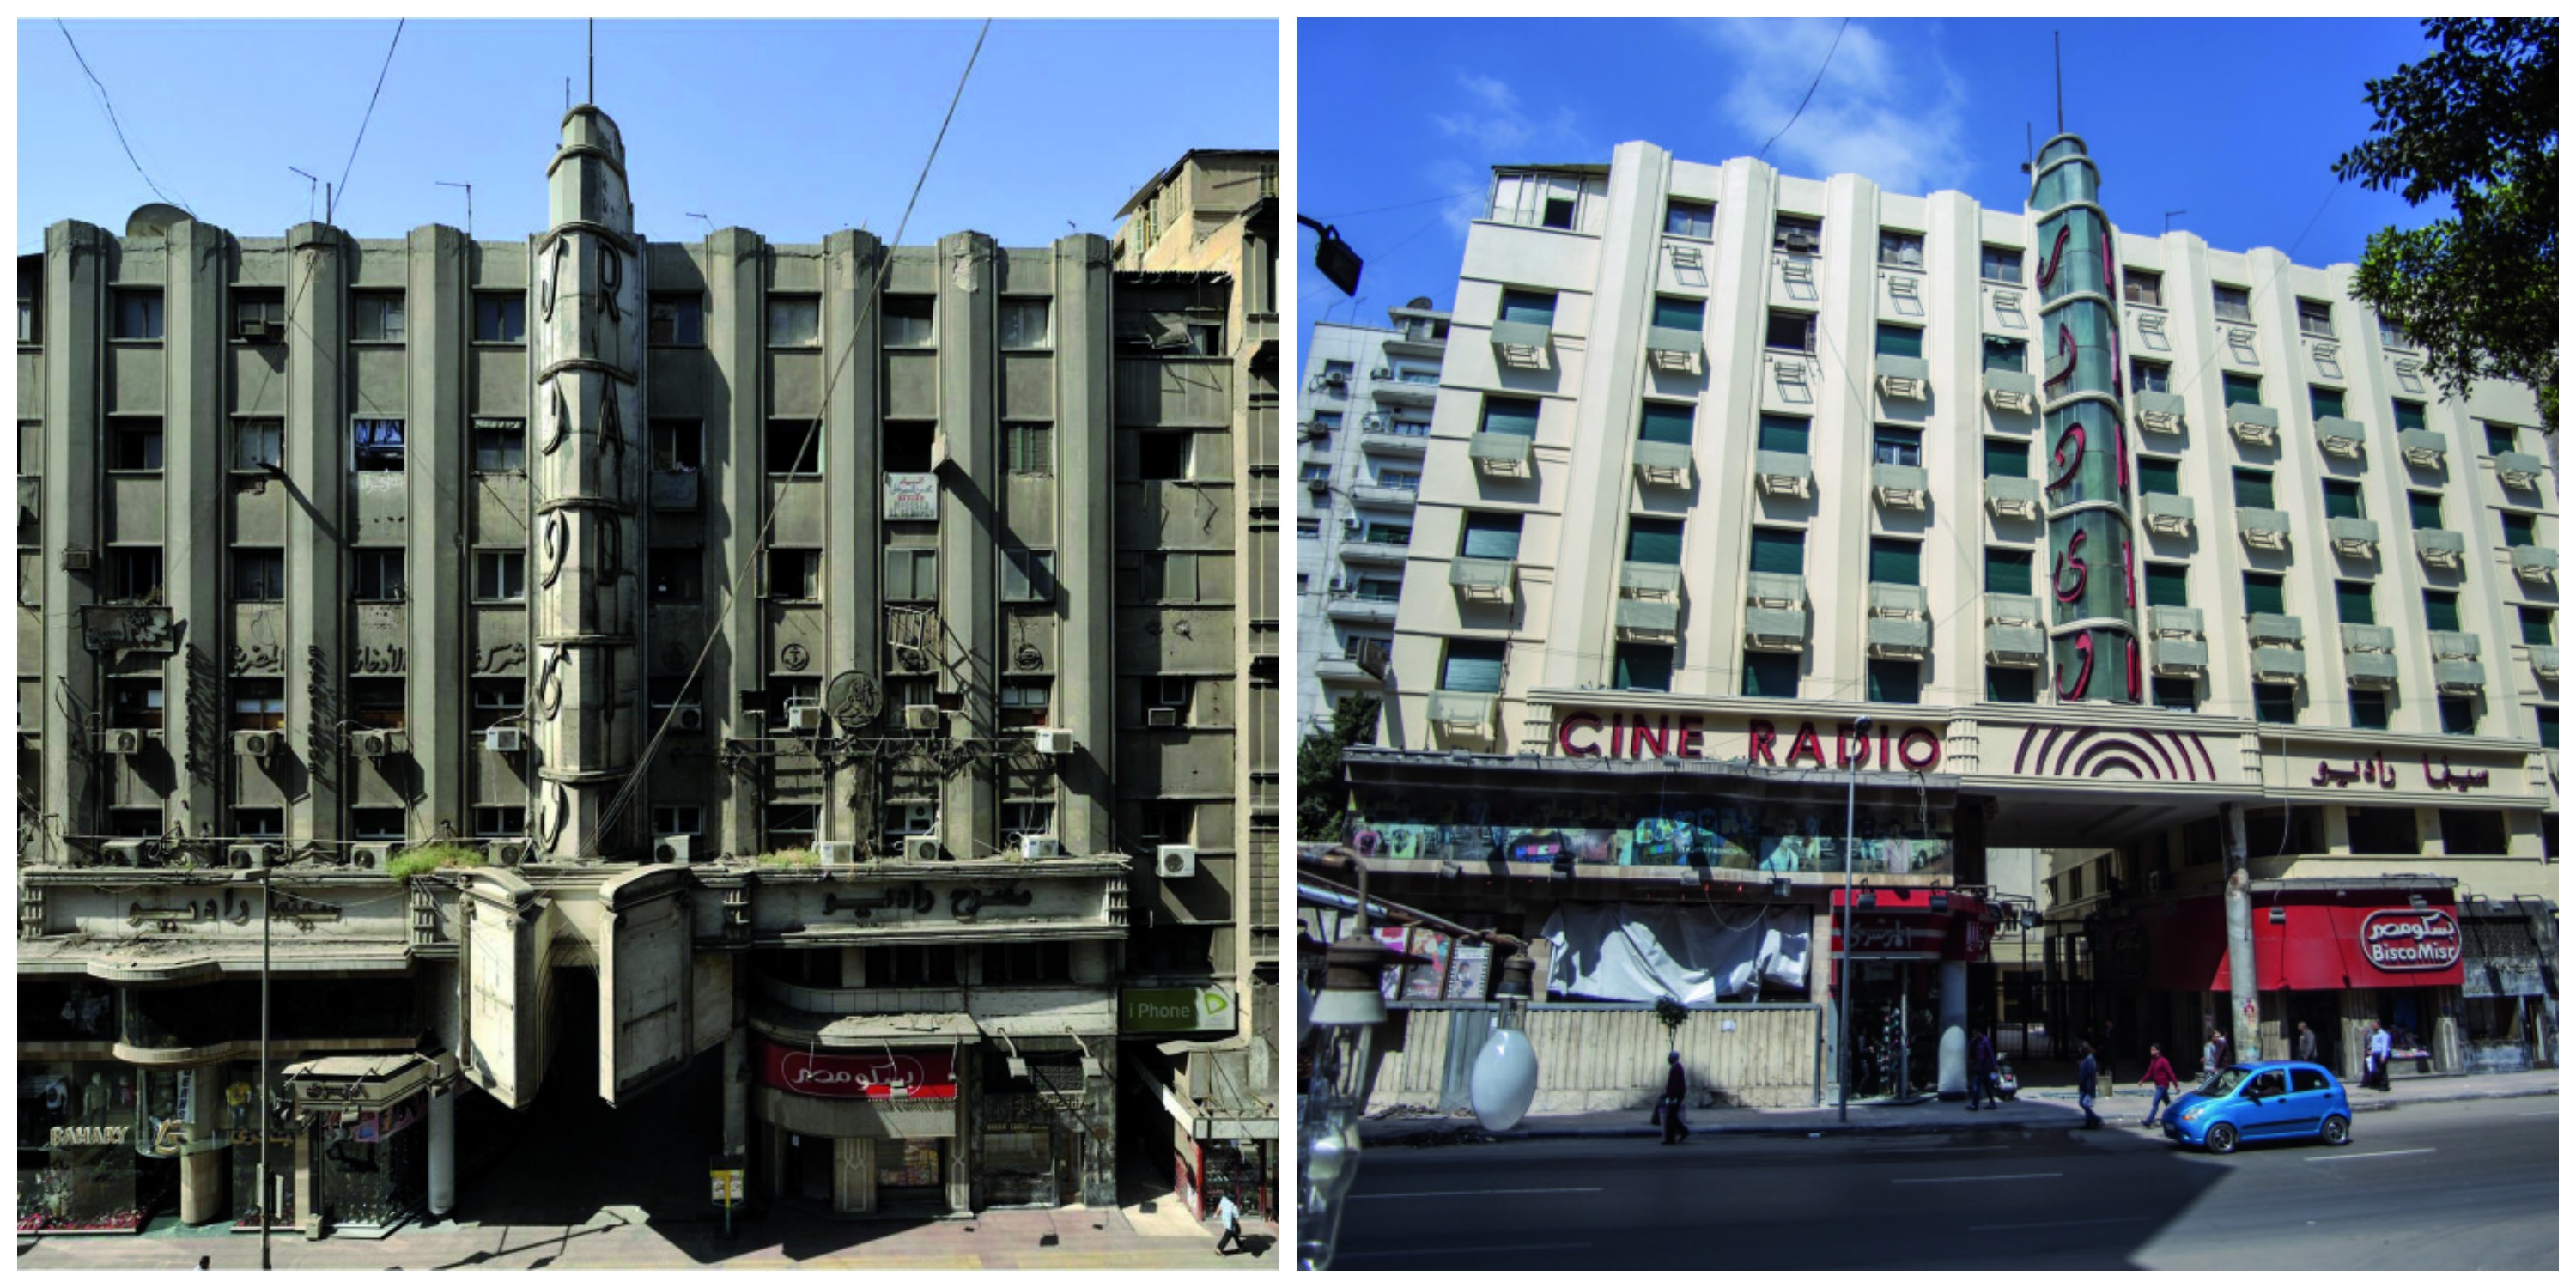 Cinema Radio before (left) and after (right), courtesy of Al-Ismaelia 